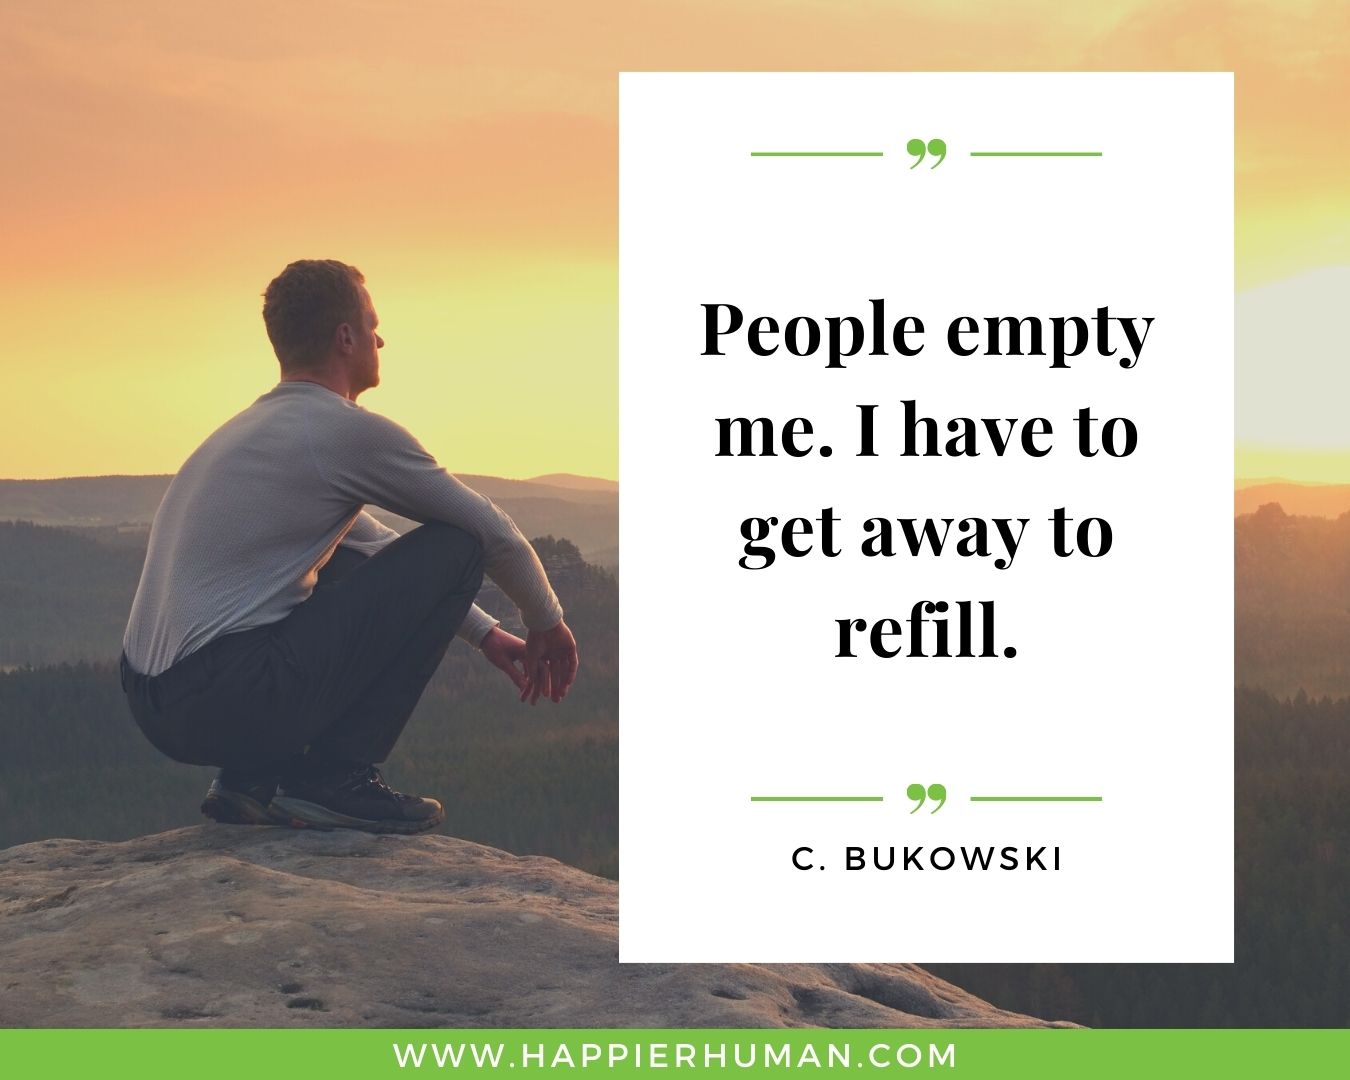 Introvert Quotes - “People empty me. I have to get away to refill.” – C. Bukowski